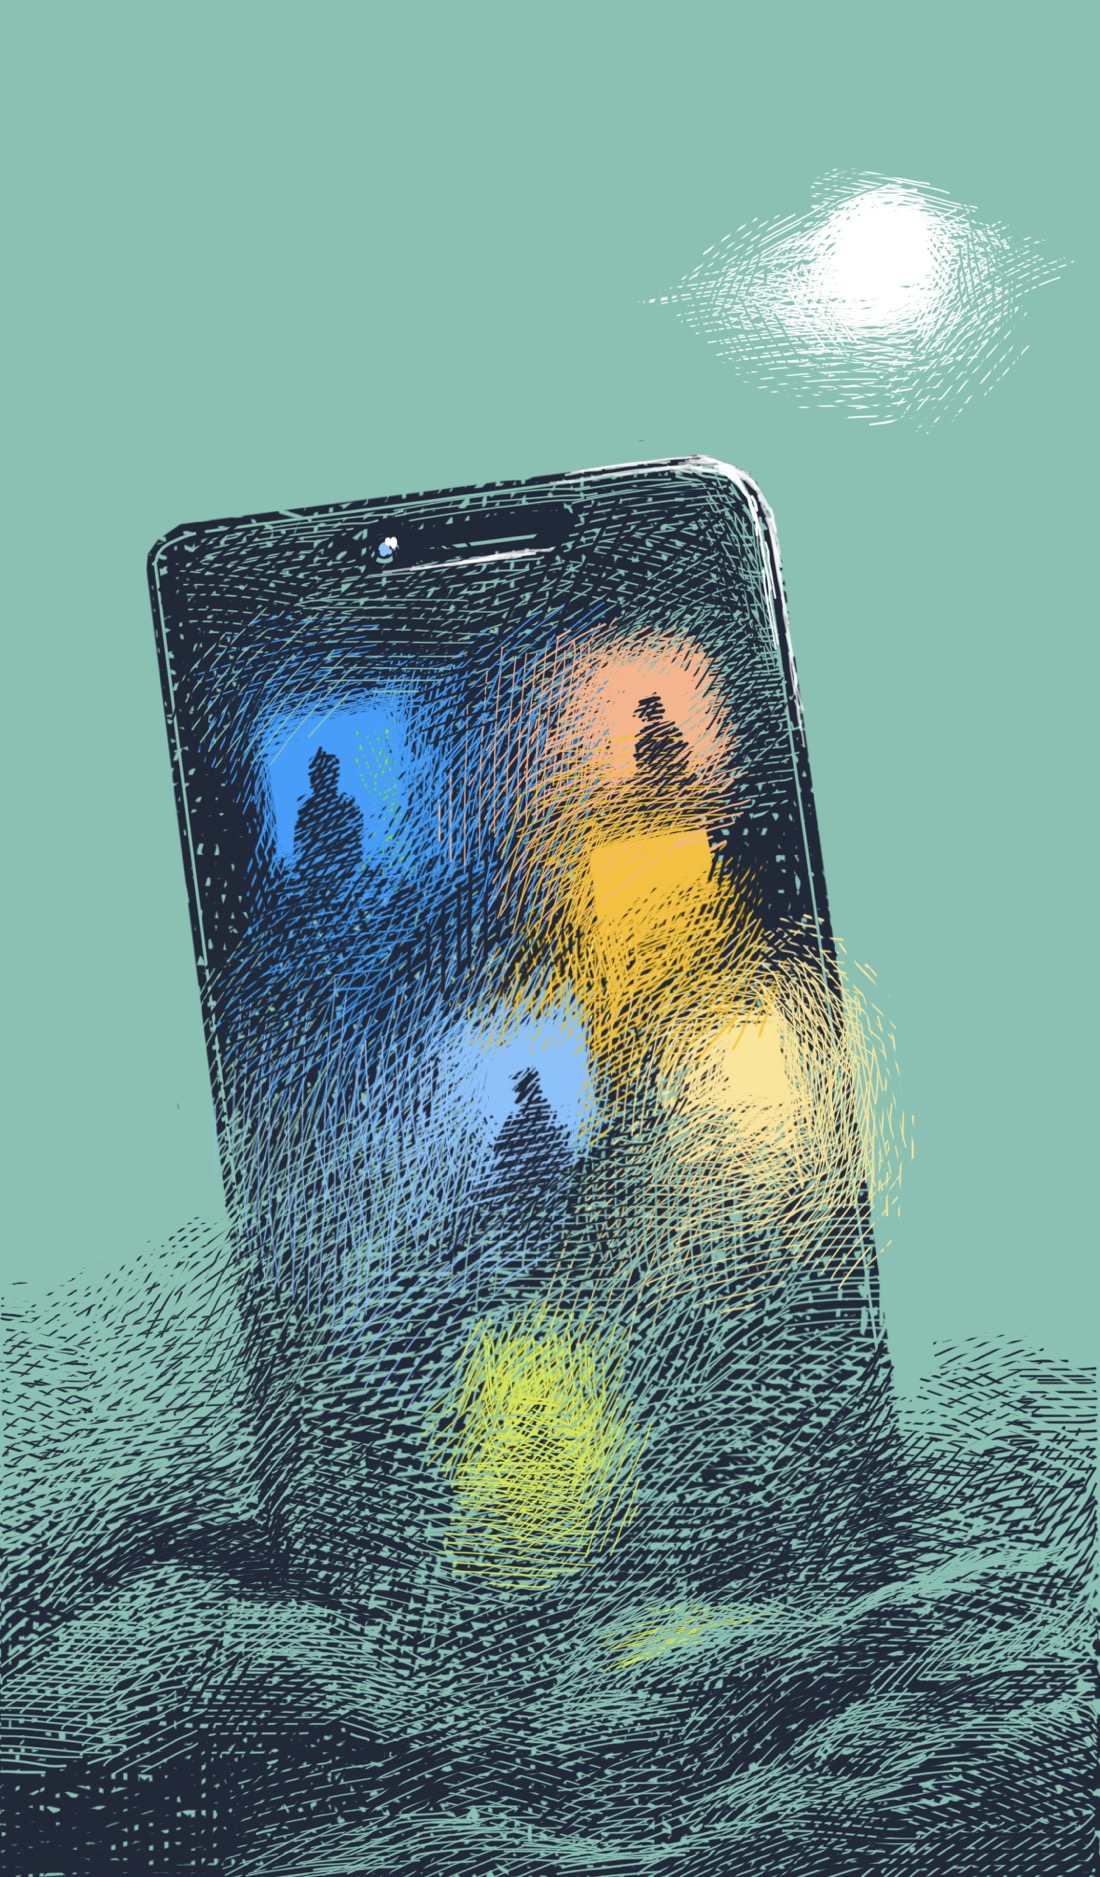 A smartphone rises up from a layer of dense fog. The base of the phone and the ground can't be seen; just an amorphous carpet of clouds. The screen of the phone is very blurry, as though obscured by a layer of vapor. The screen shows glowing colored squares, arranged haphazardly, not in the usual grid of app icons. Silhouettes are visible in the squares, like people looking out of windows. Above the phone, a blurry moon is in the sky. The moonlight reflects off the top of the phone.